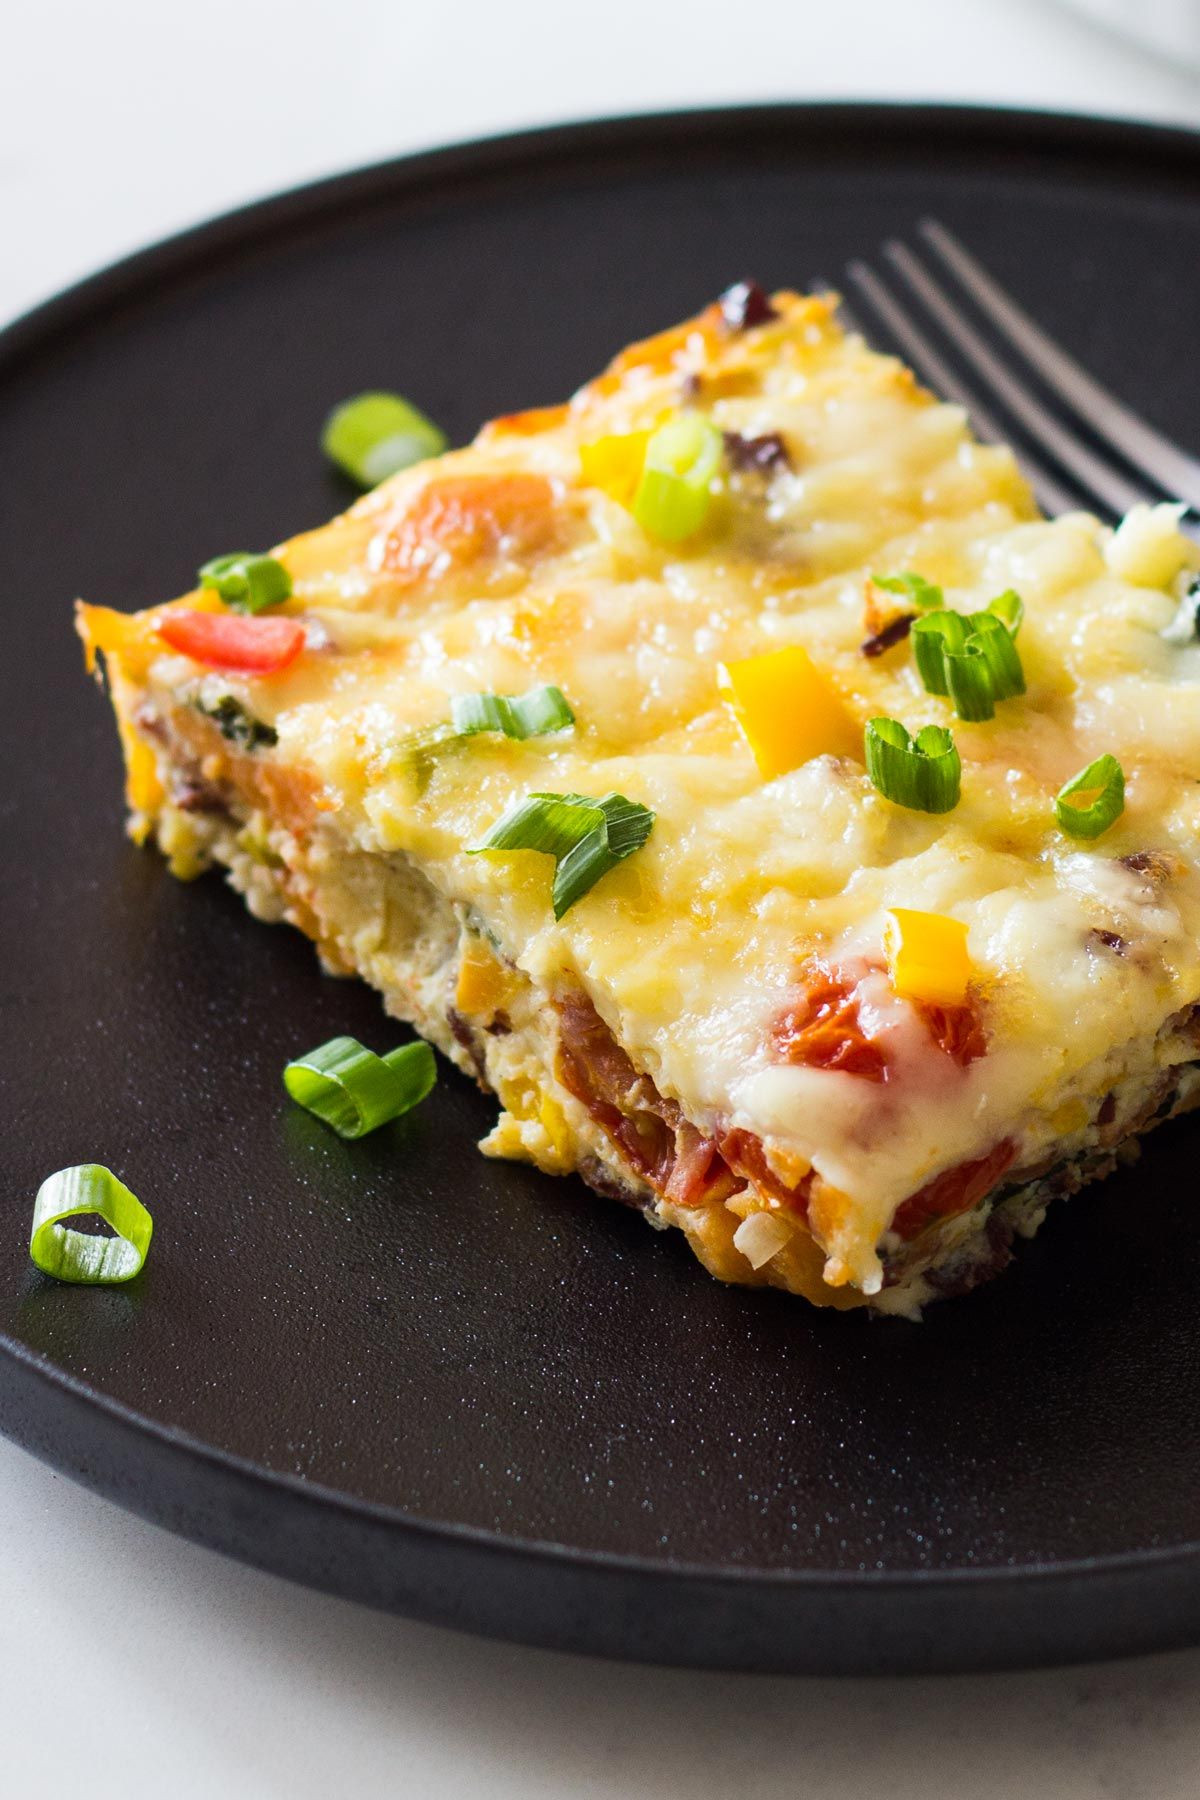 Eggs And Potatoes Breakfast
 This healthy Sweet Potato Breakfast Casserole with eggs